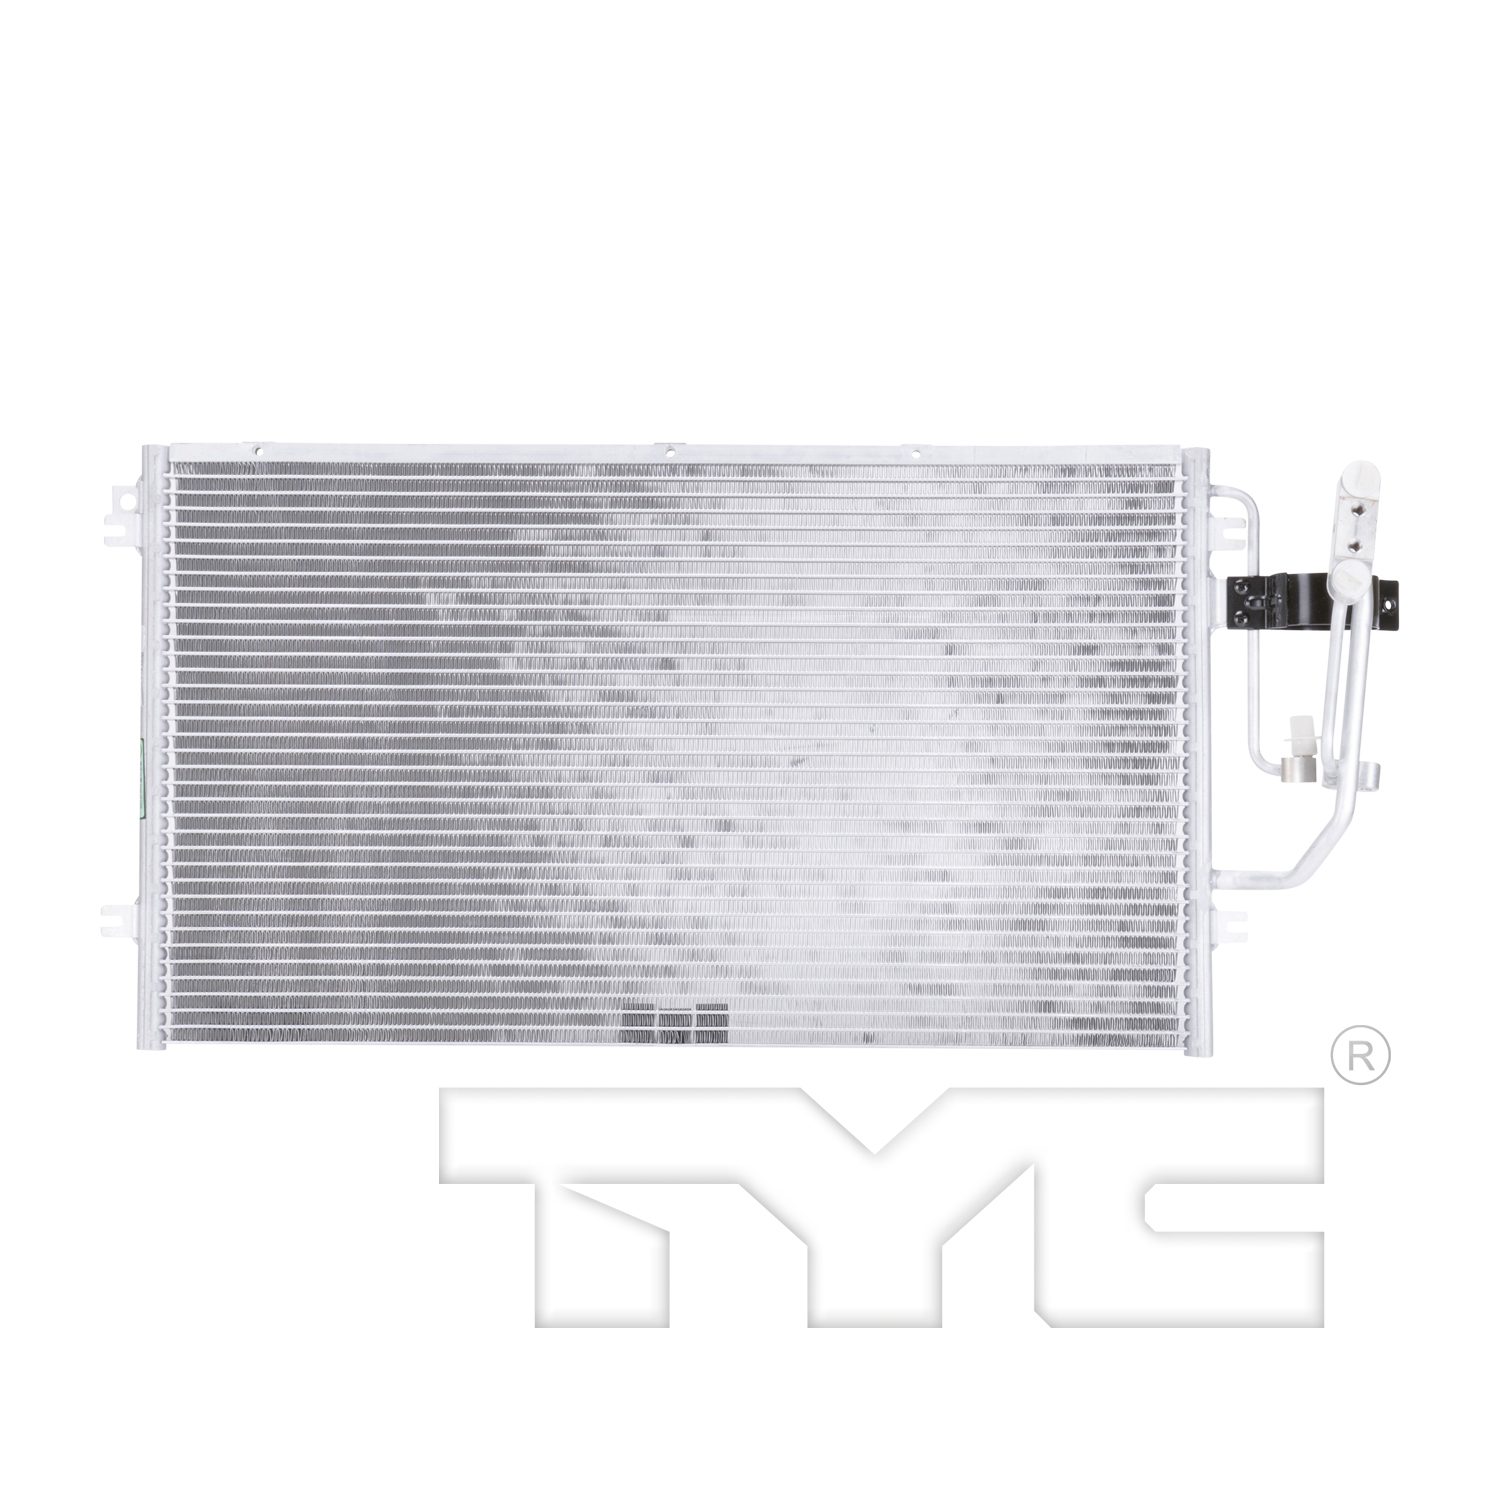 Aftermarket AC CONDENSERS for SATURN - LW200, LW200,01-03,Air conditioning condenser